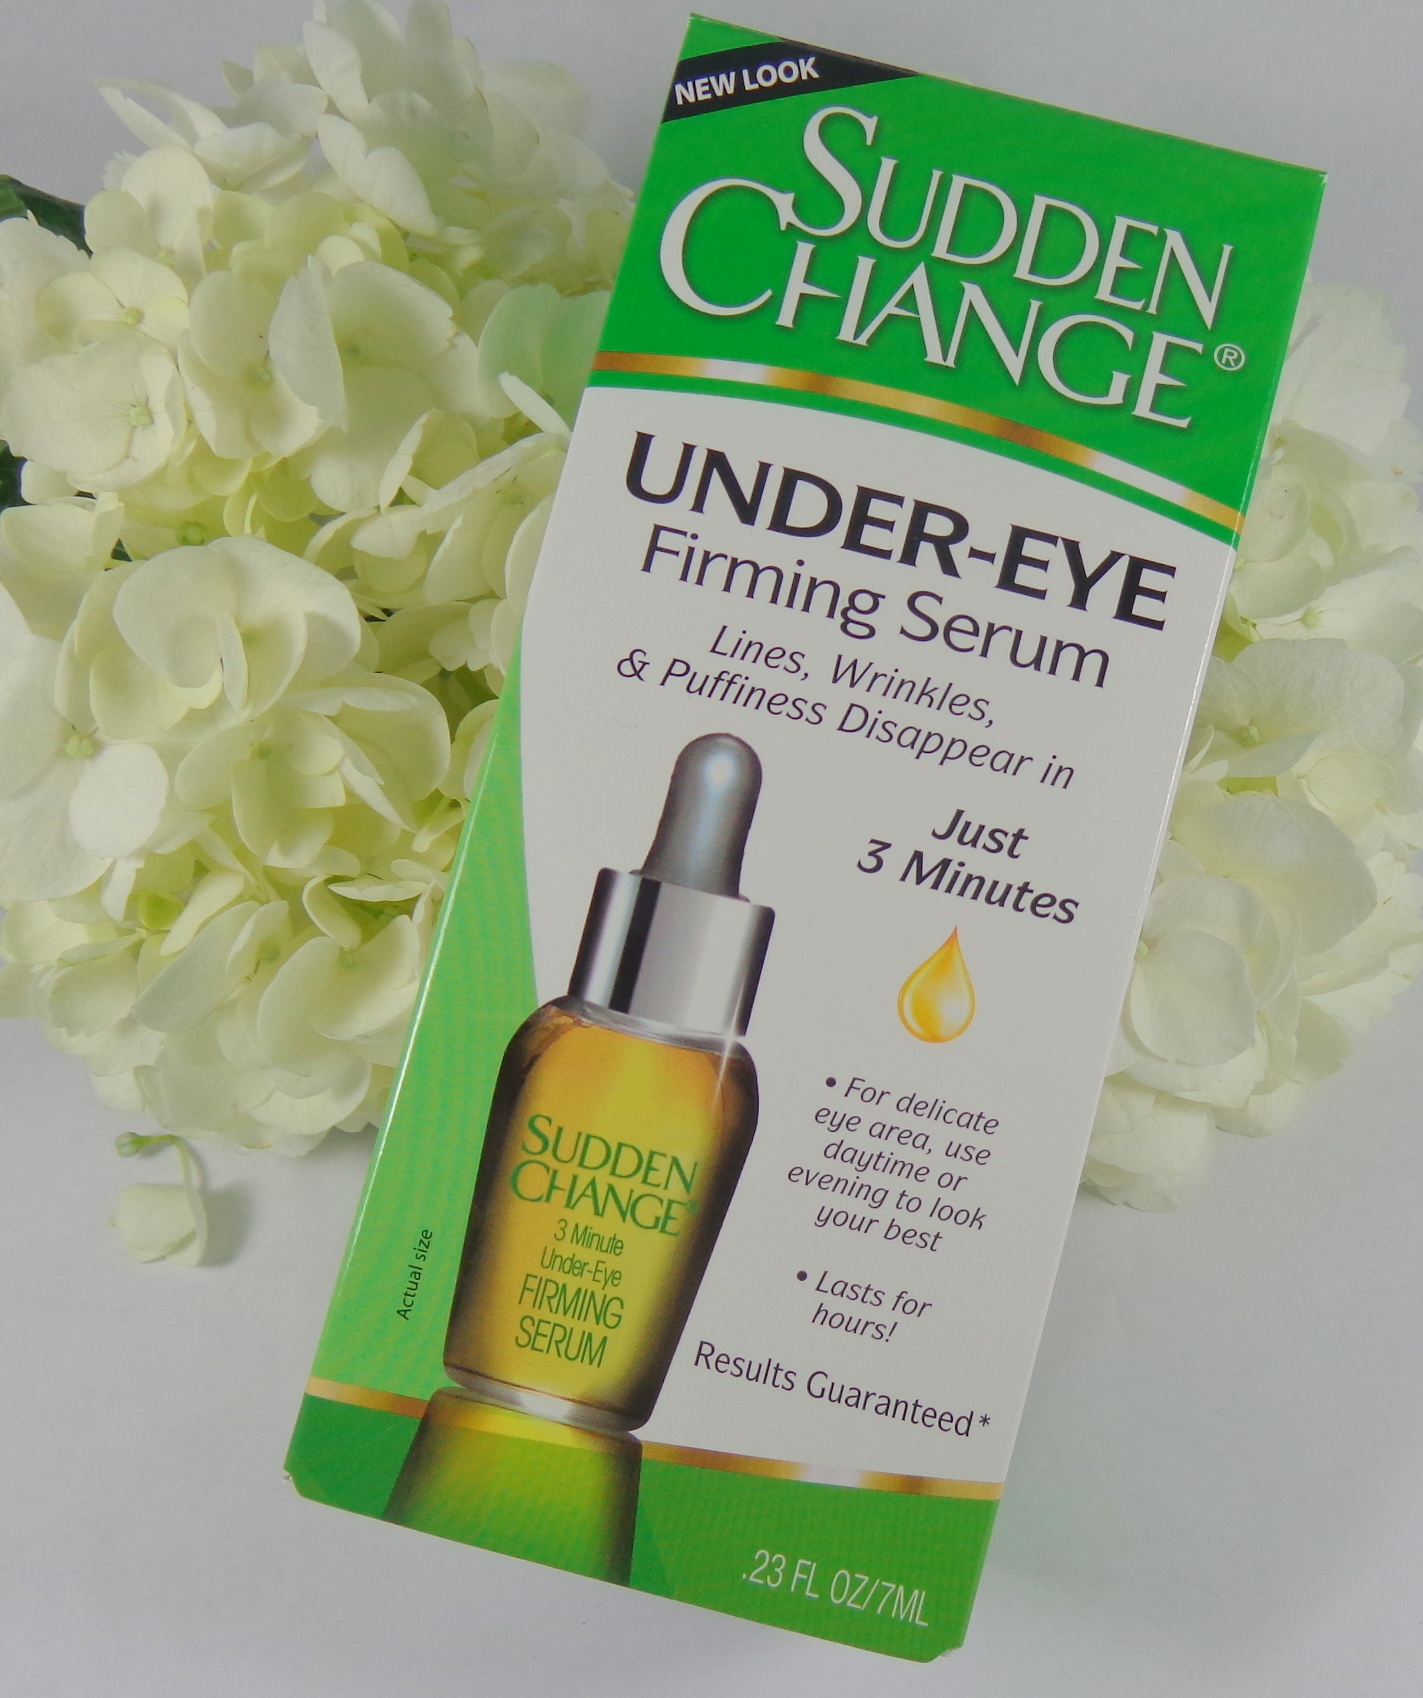 Sudden Change Brings Results for Your Under-Eye Area - My Highest Self